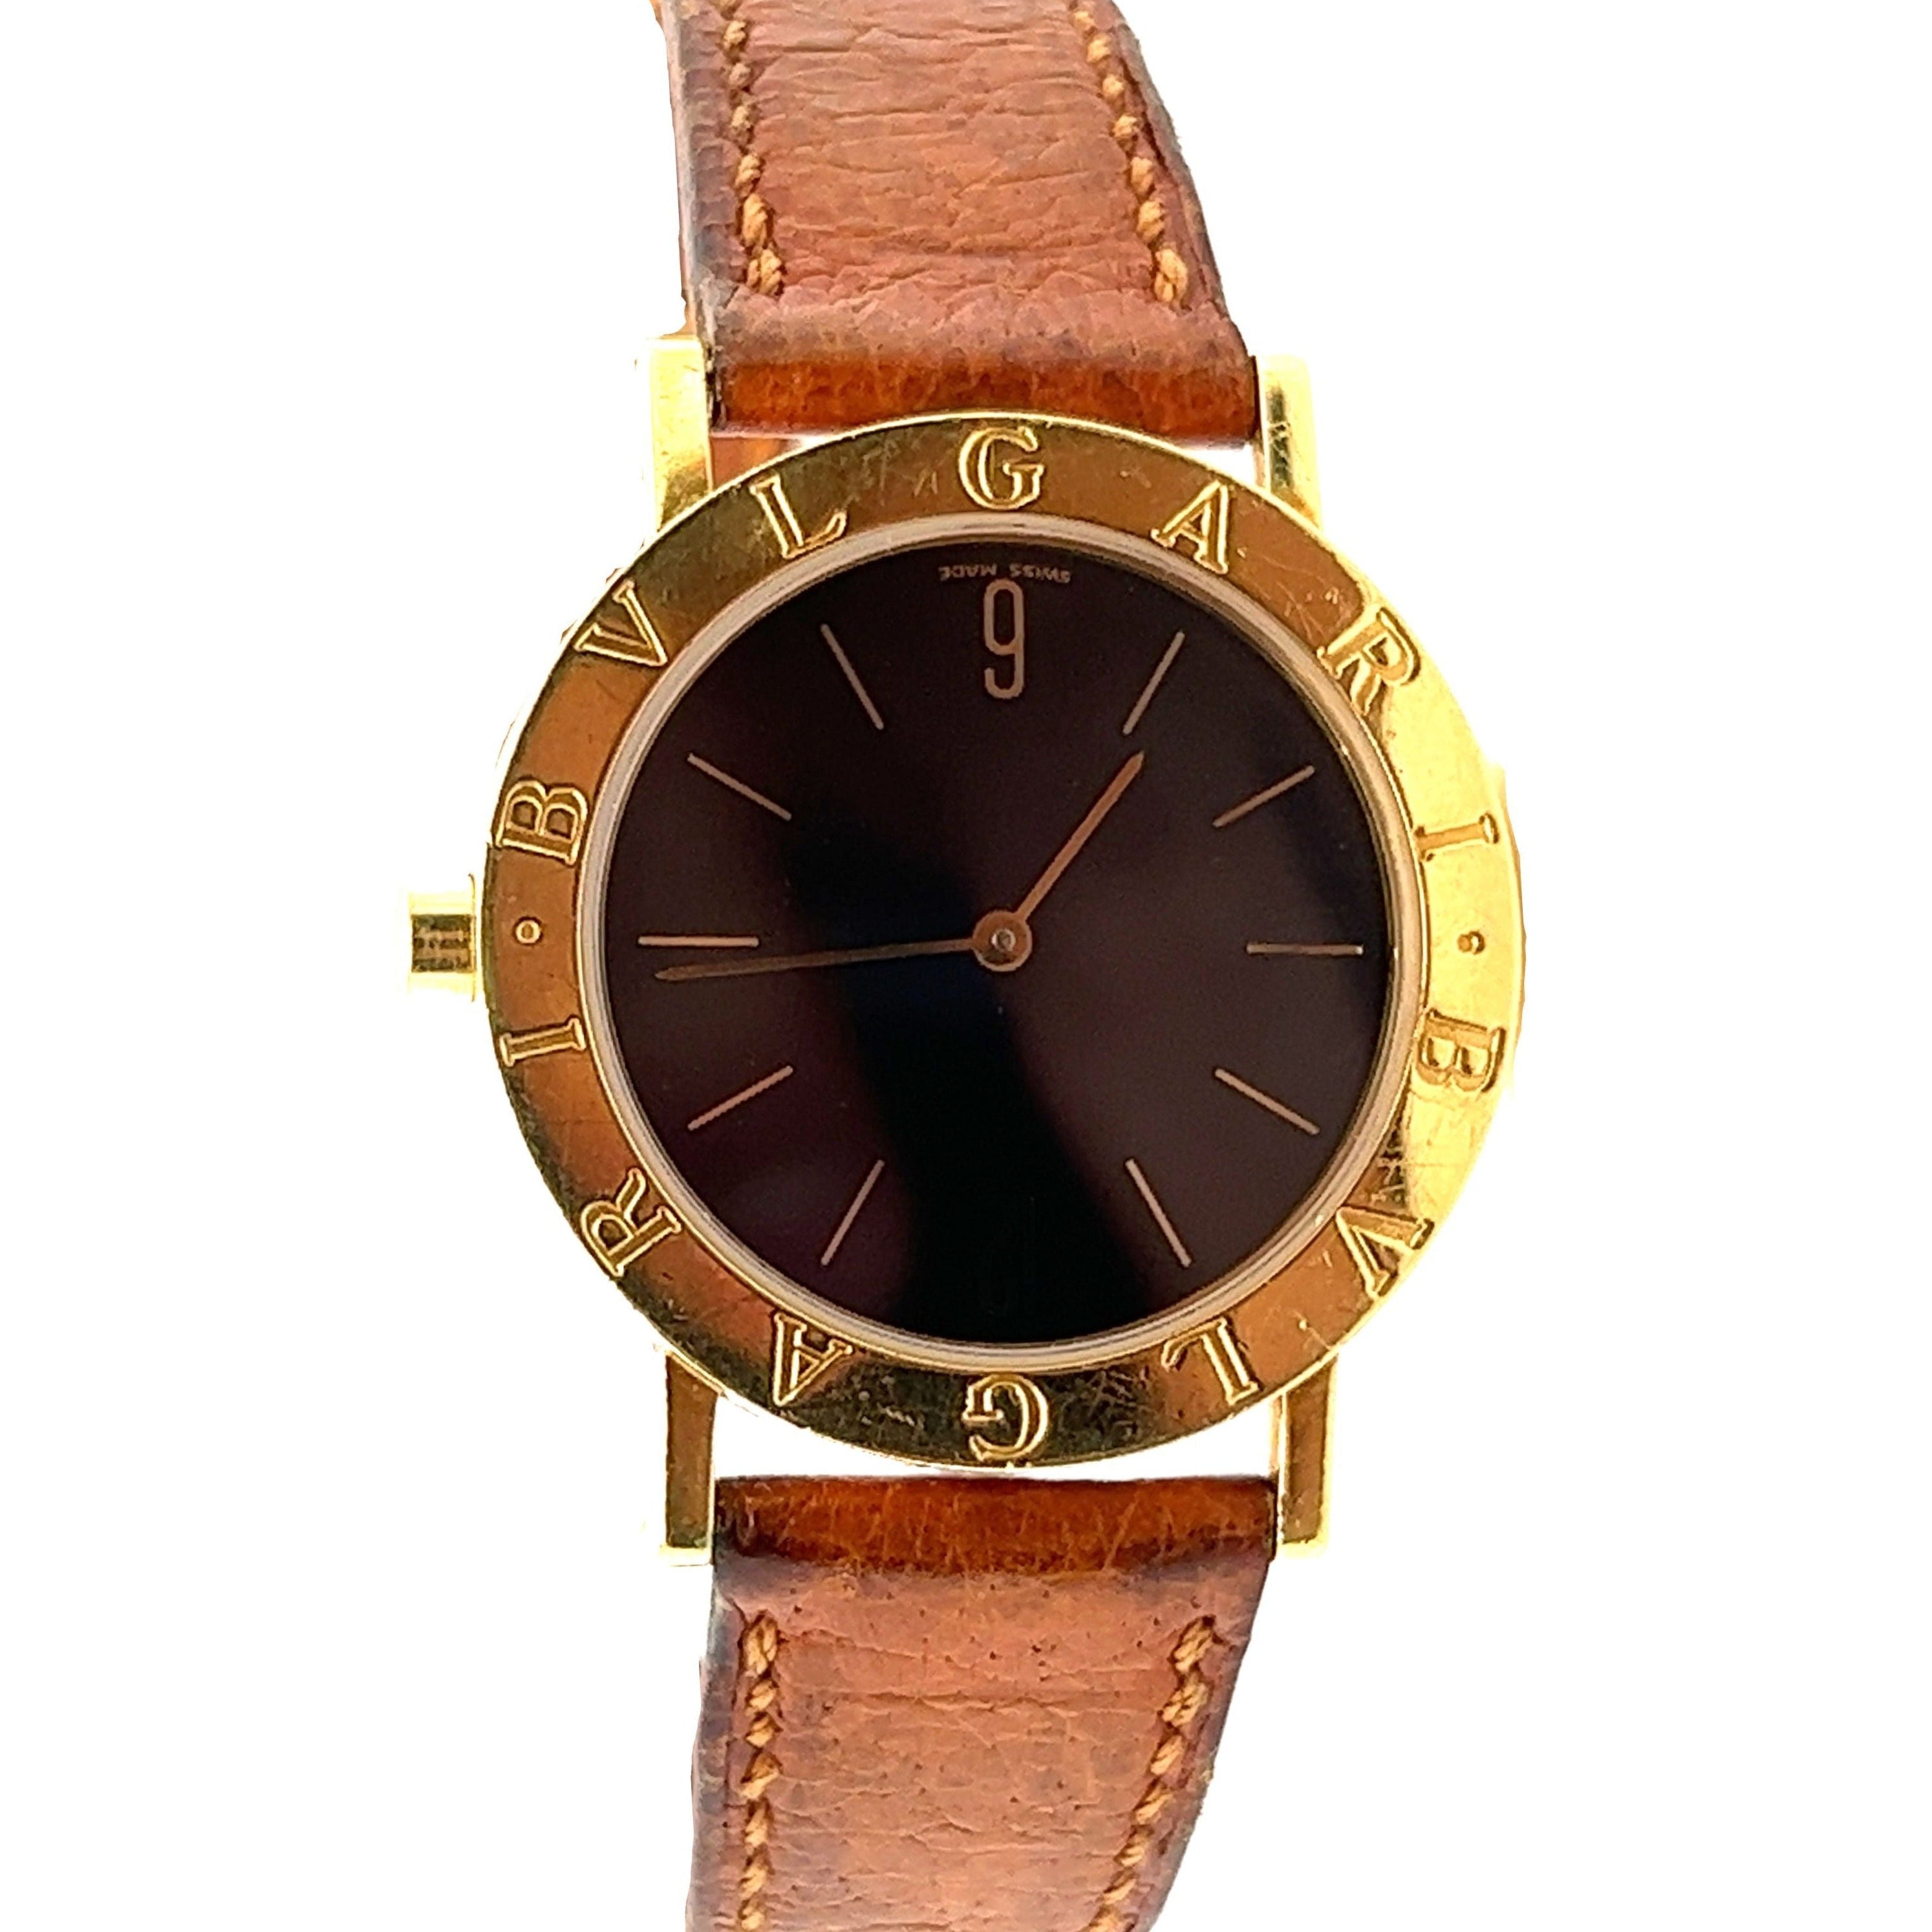 Bvlgari Vintage Mens Watch Ref. BB30 GI in 18K Yellow Gold & Leather Strap-Watches-ASSAY